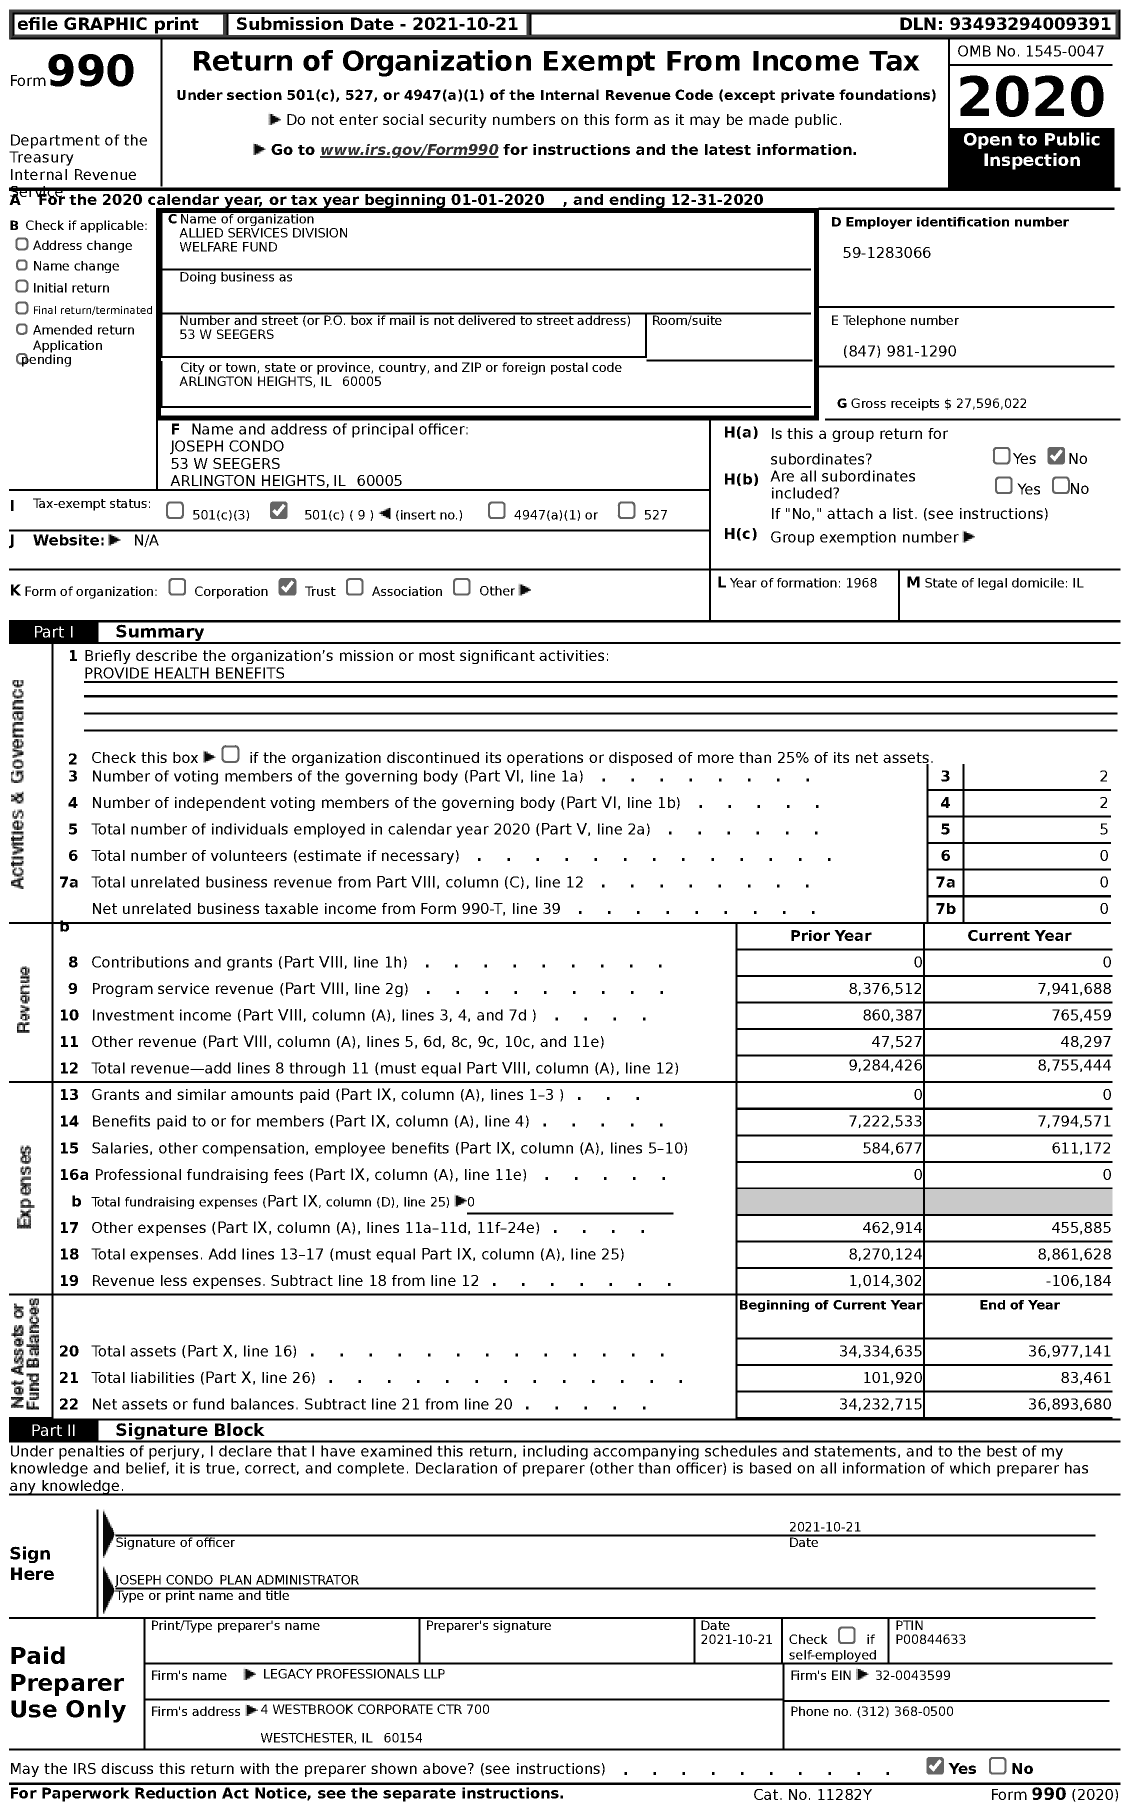 Image of first page of 2020 Form 990 for Allied Services Division Welfare Fund